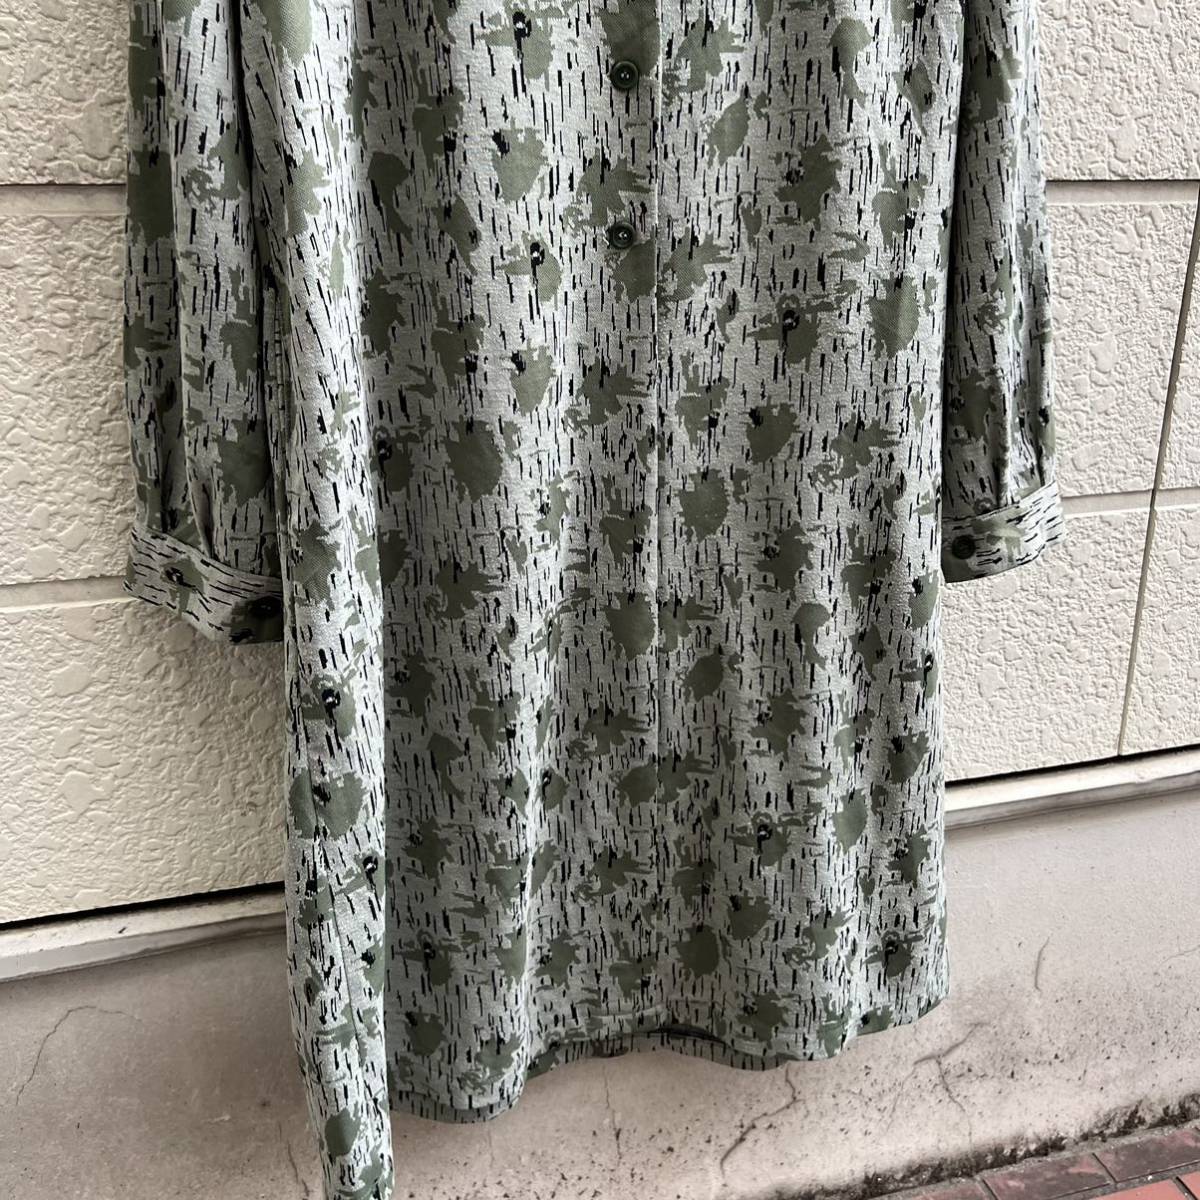 USED USA古着 シャツワンピース カモフラ柄 迷彩柄 カモフラージュ ロング丈 ロングシャツ アメリカ古着 vintage ヴィンテージ 総柄_画像5